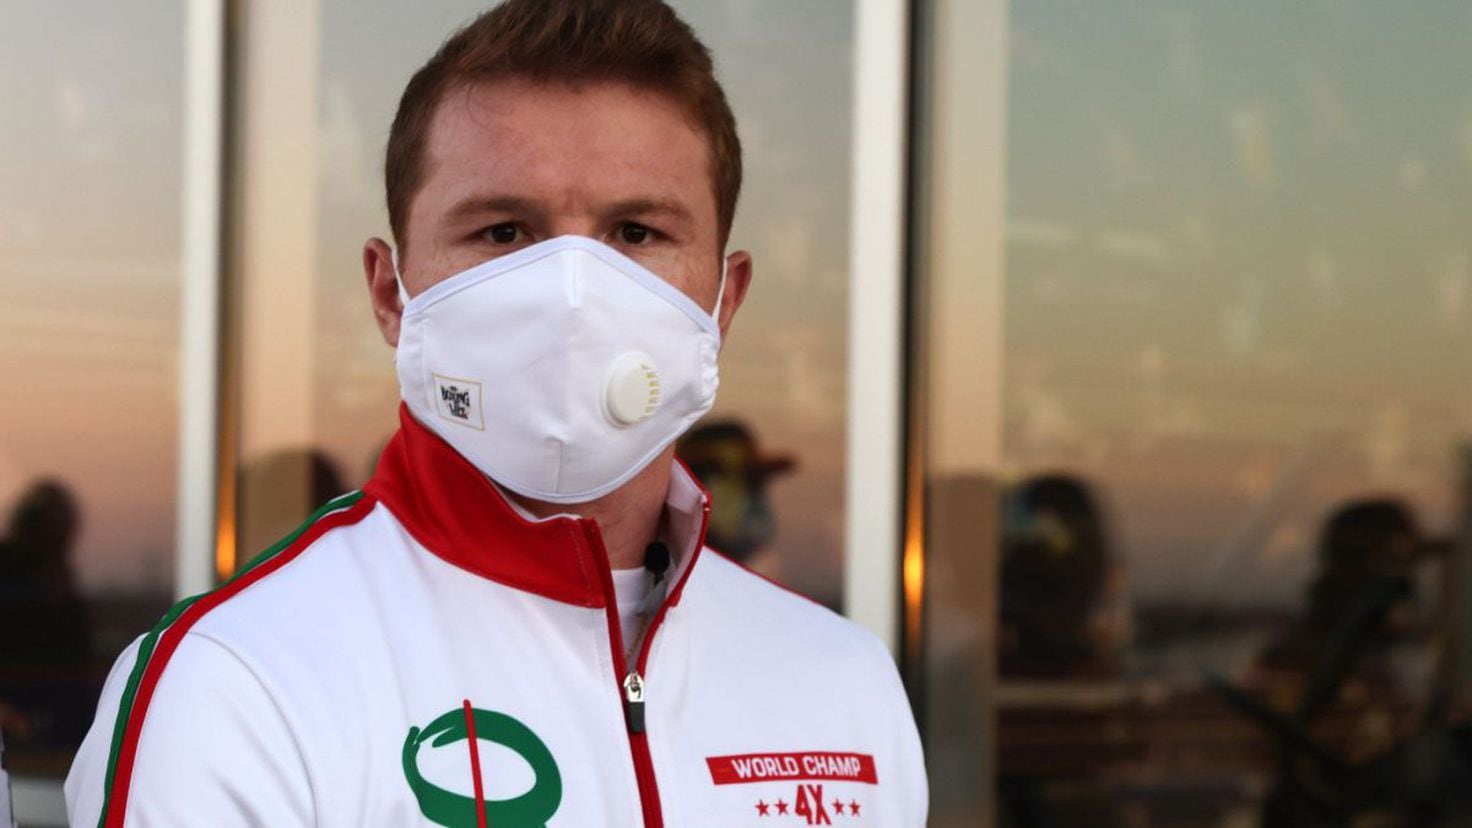 Canelo Alvarez Net Worth: How much did his bank account increase